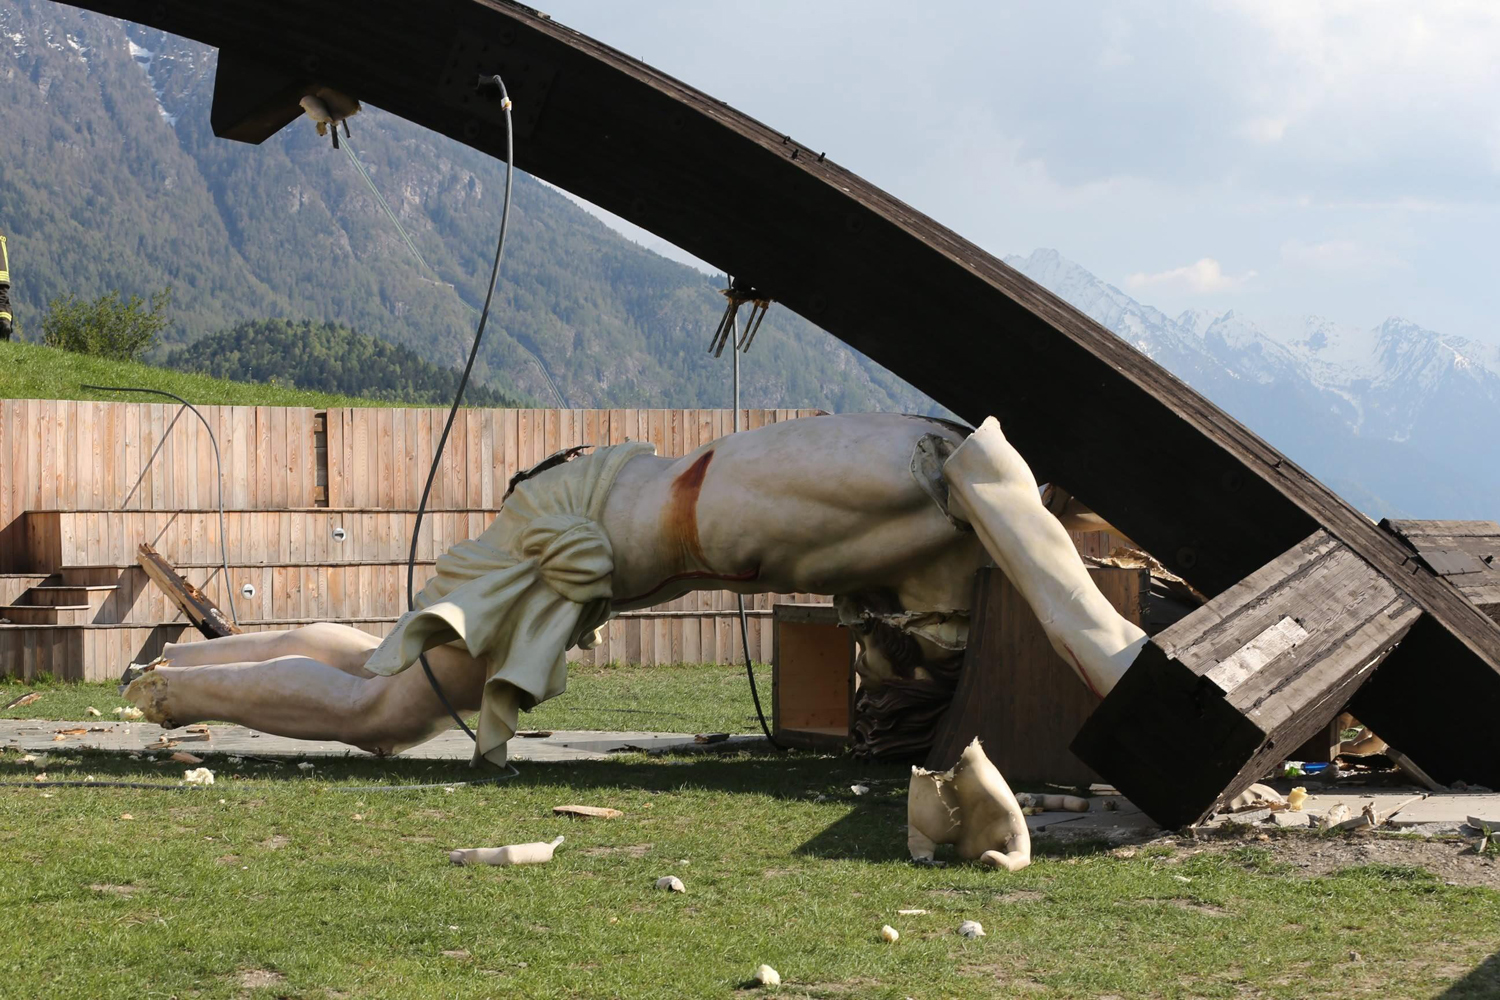 Apr. 24, 2014. A general view of the broken statue after the 30-metre-high, curved wooden cross dedicated to the late John Paul II collapsed in Cevo, Valcamonica, Italy, killing a 21-year-old man.